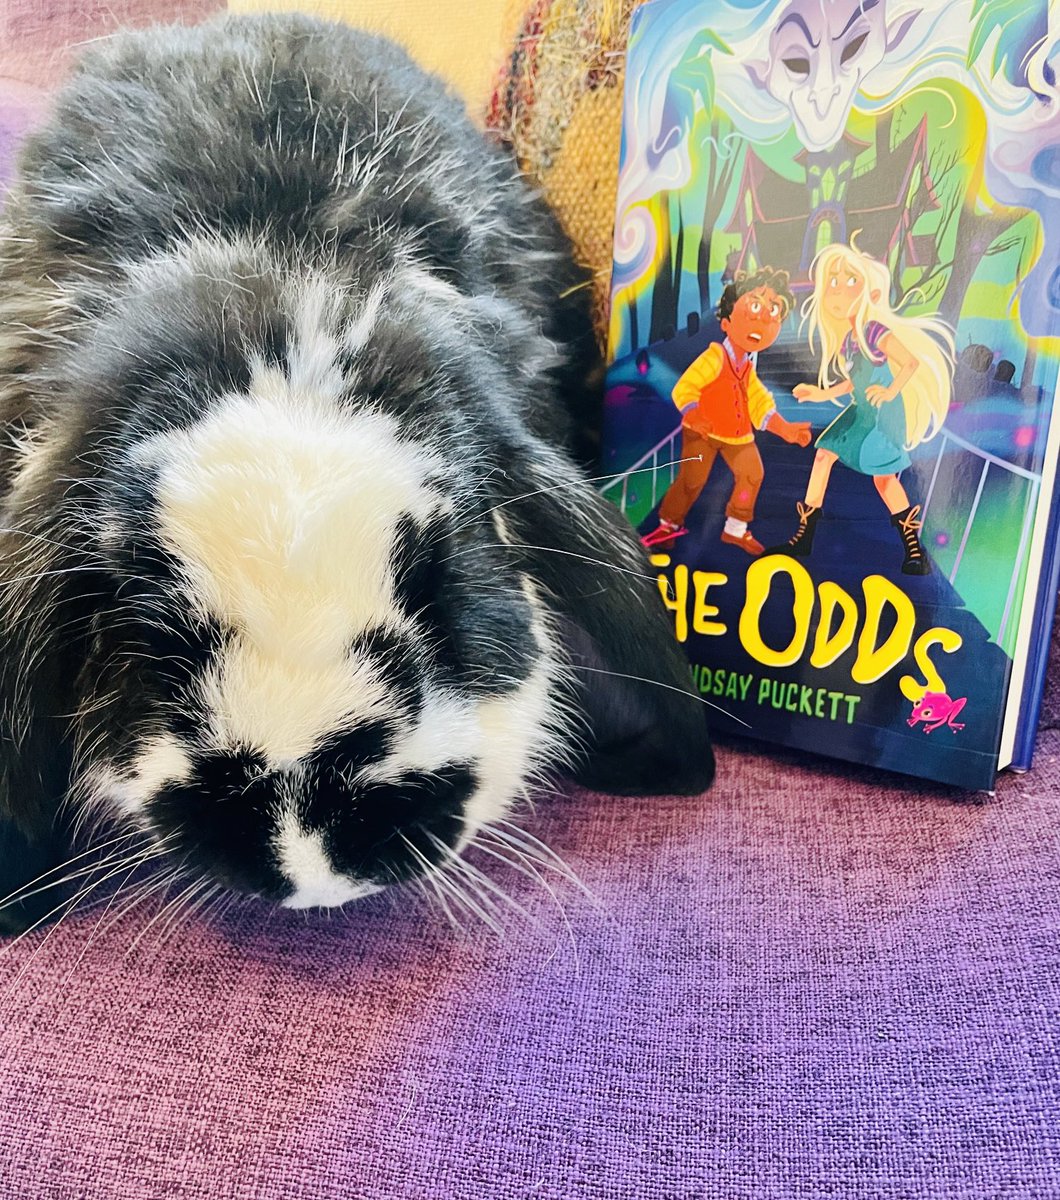 Deliciously creepy! - Clark Gable Clark has admitted there may have been stress nibbling at scary parts but he had a hopping good time from the first sentence to the tail end of of The Odds. Clark’s favorite side characters? The dust bunnies of course! ⁦@puckett_lindsay⁩